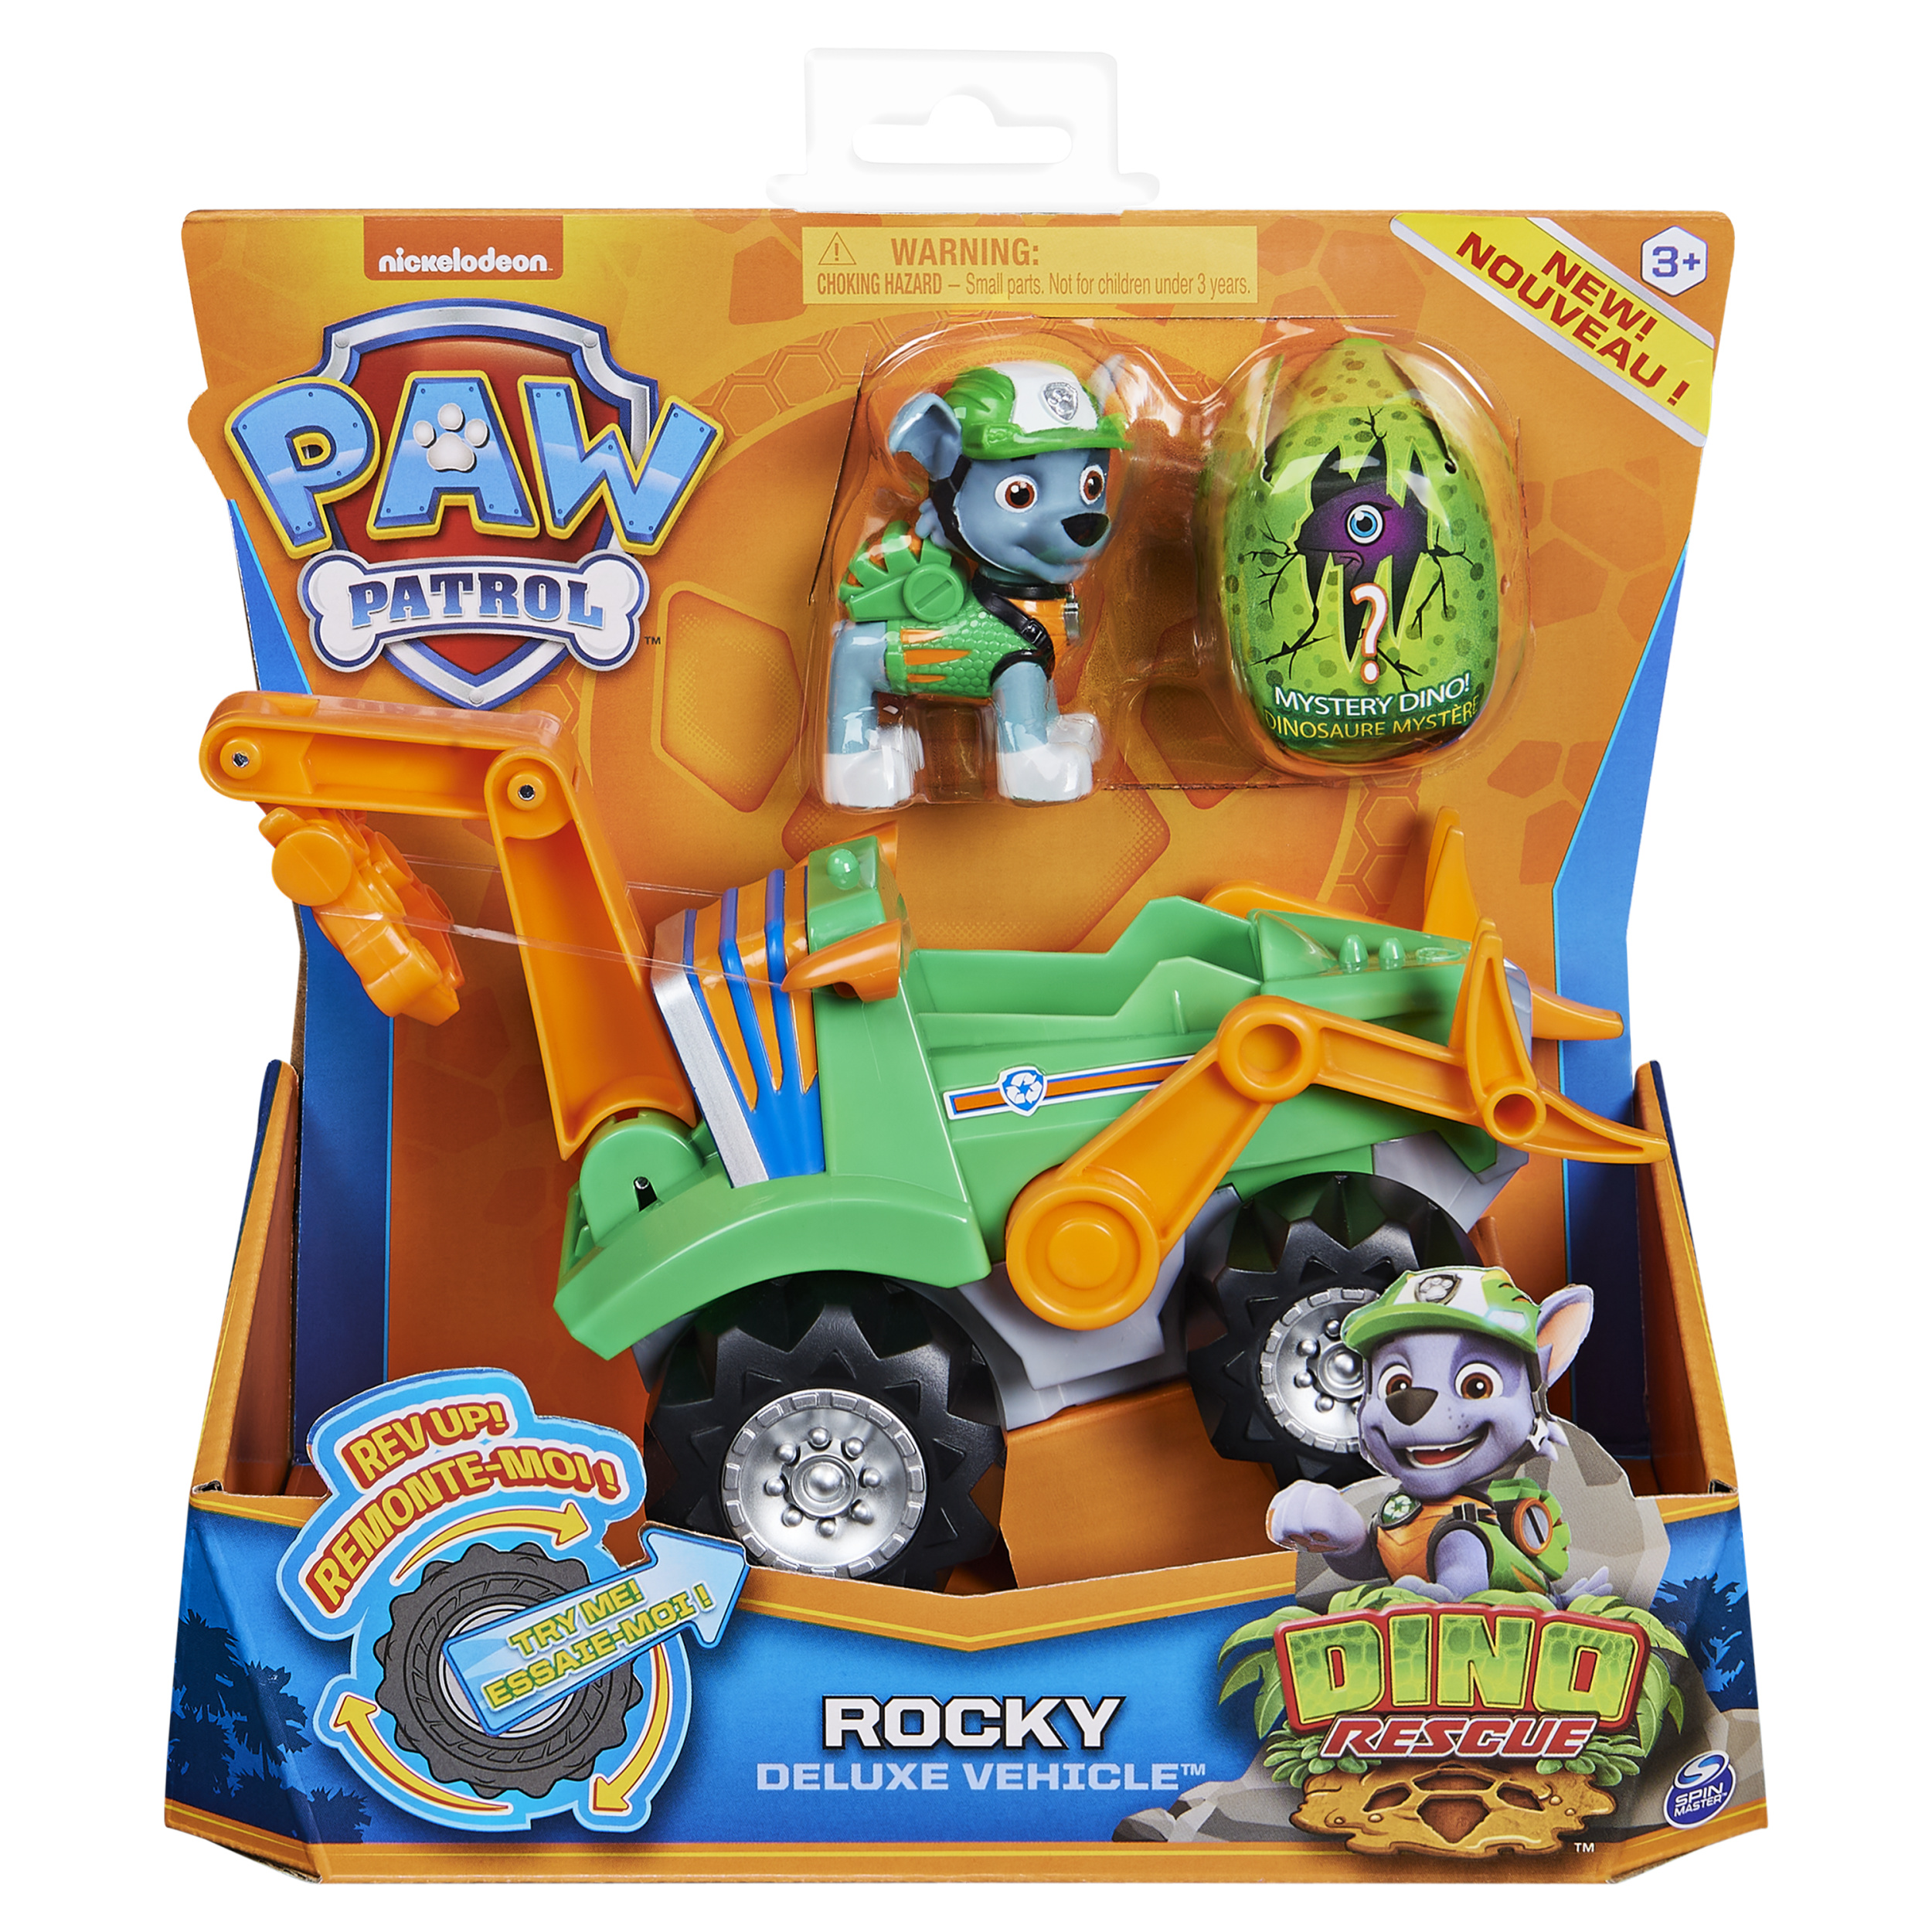 Paw Patrol Deluxe Dino Vehicles Assortment (Styles May Vary) - image 5 of 6